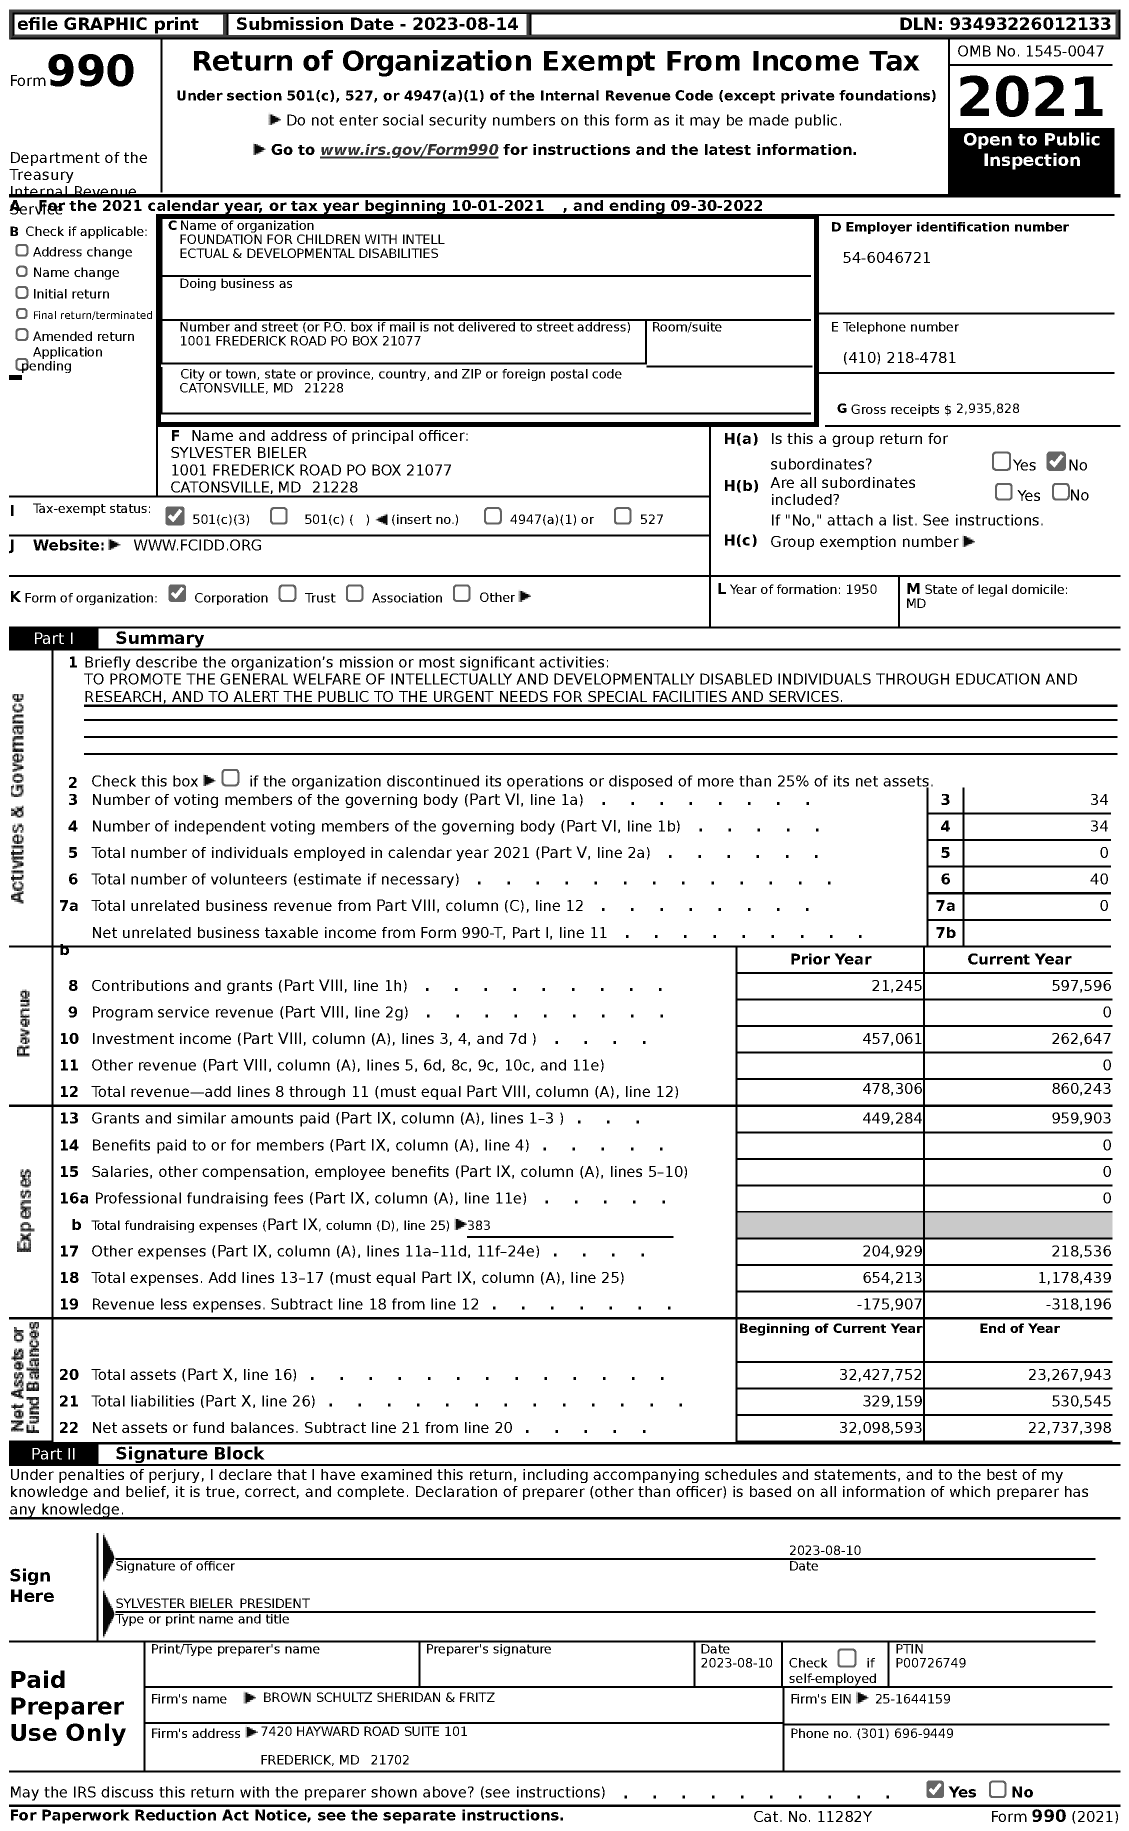 Image of first page of 2021 Form 990 for Foundation for Children with Intell Ectual and Developmental Disabilities